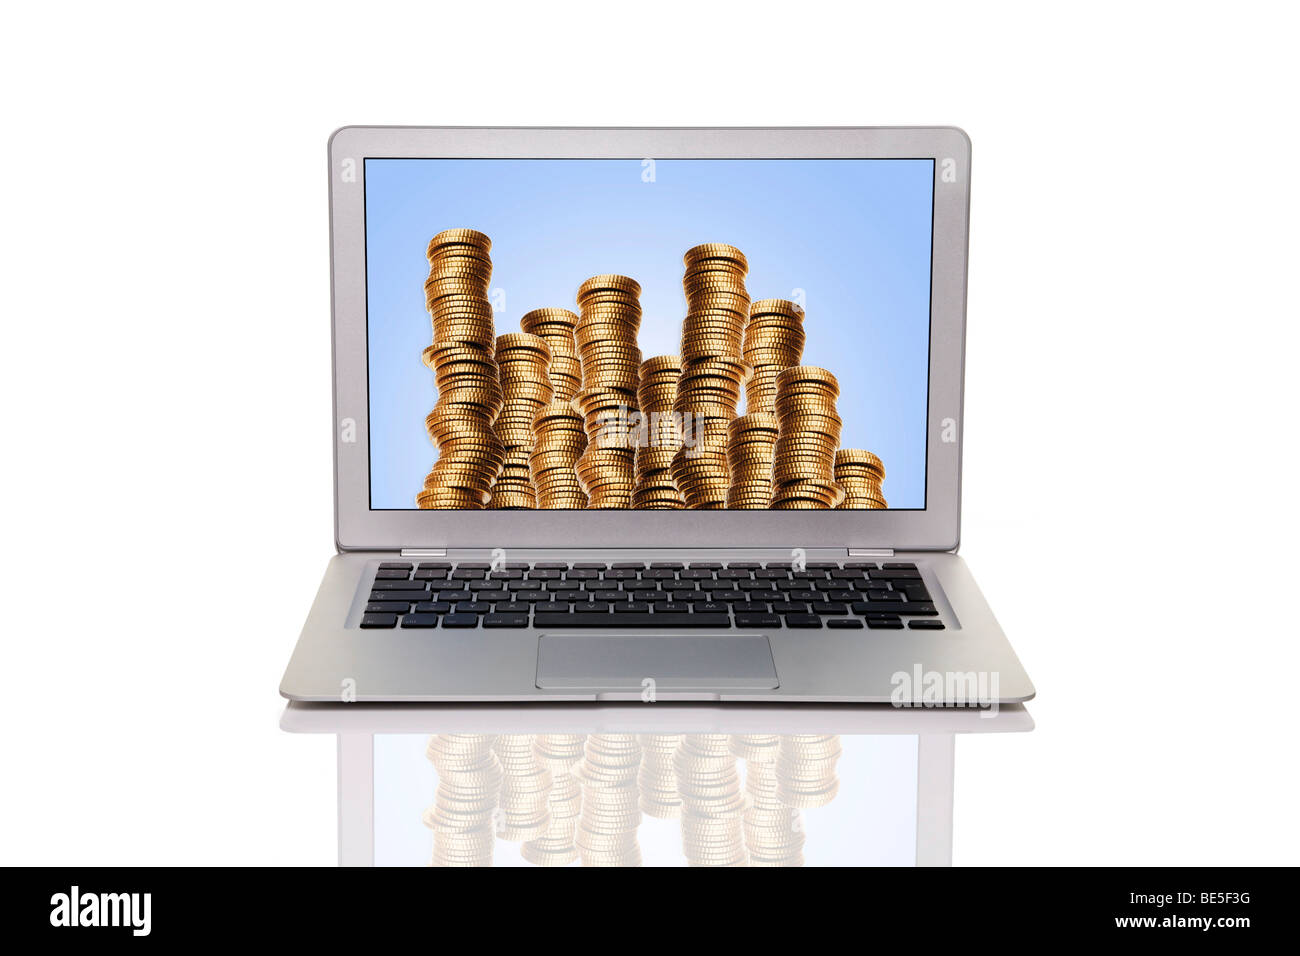 Laptop with a pile of money Stock Photo